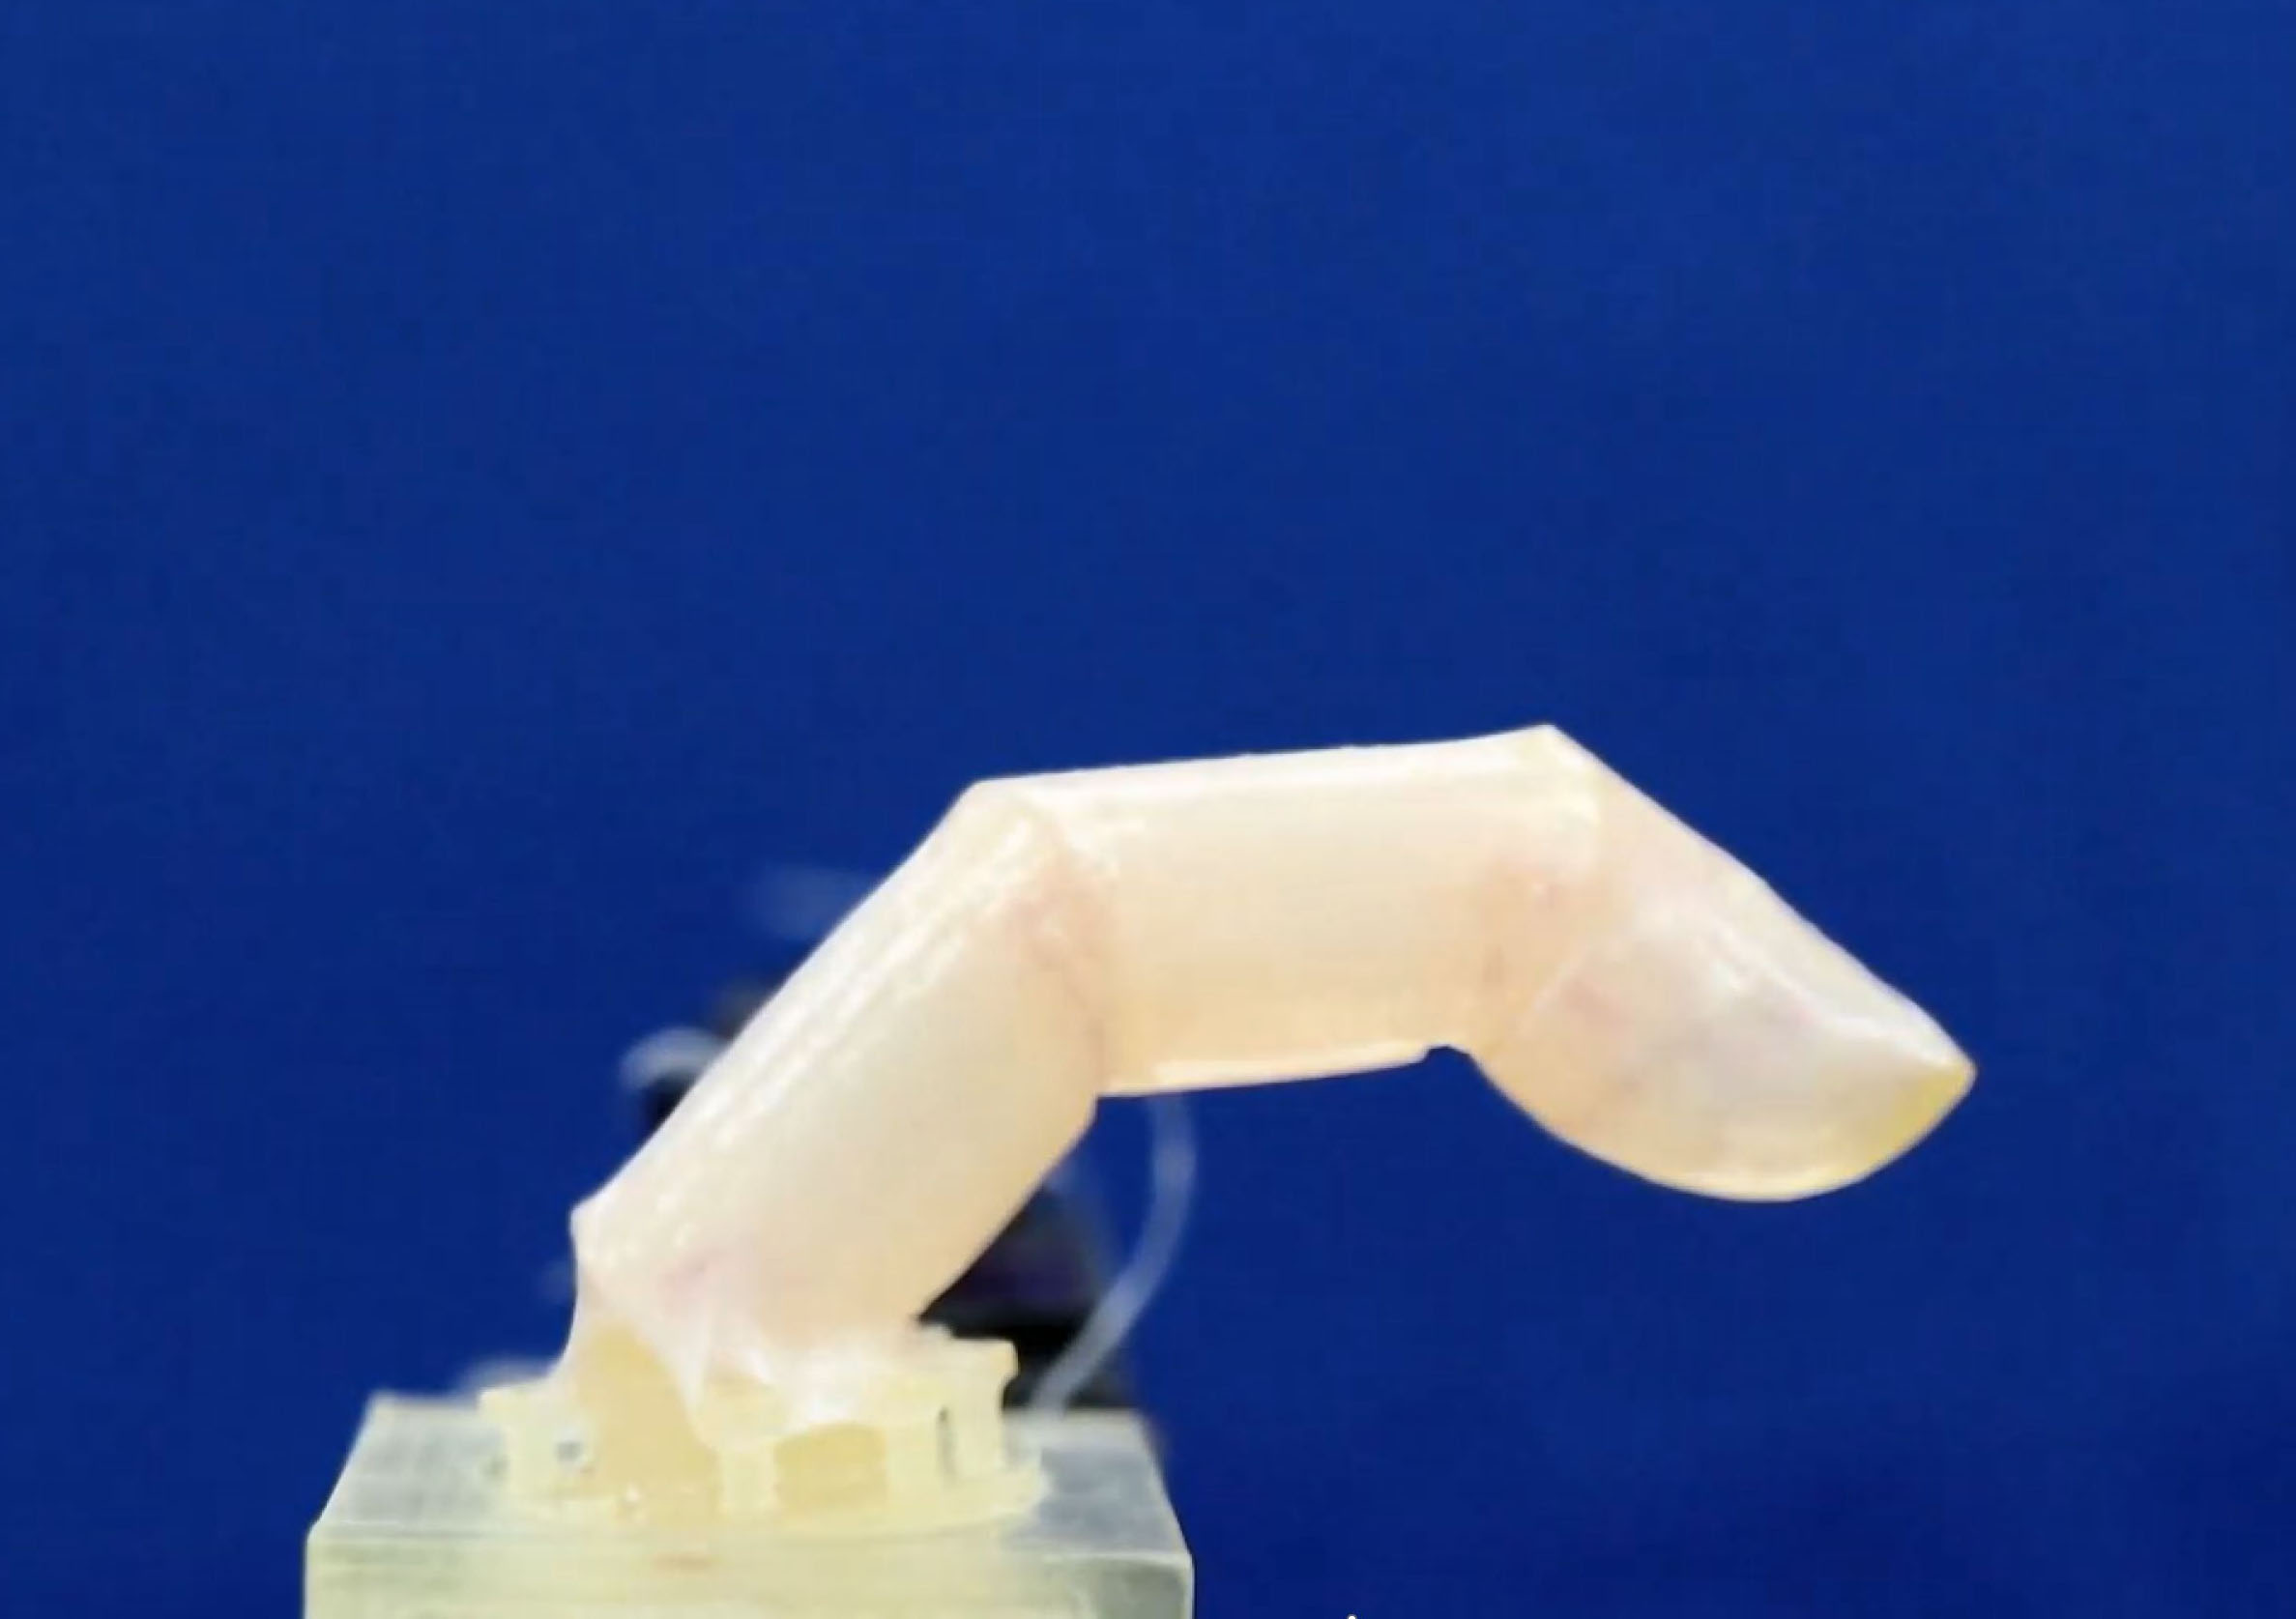 A bending robotic finger covered with human living skin